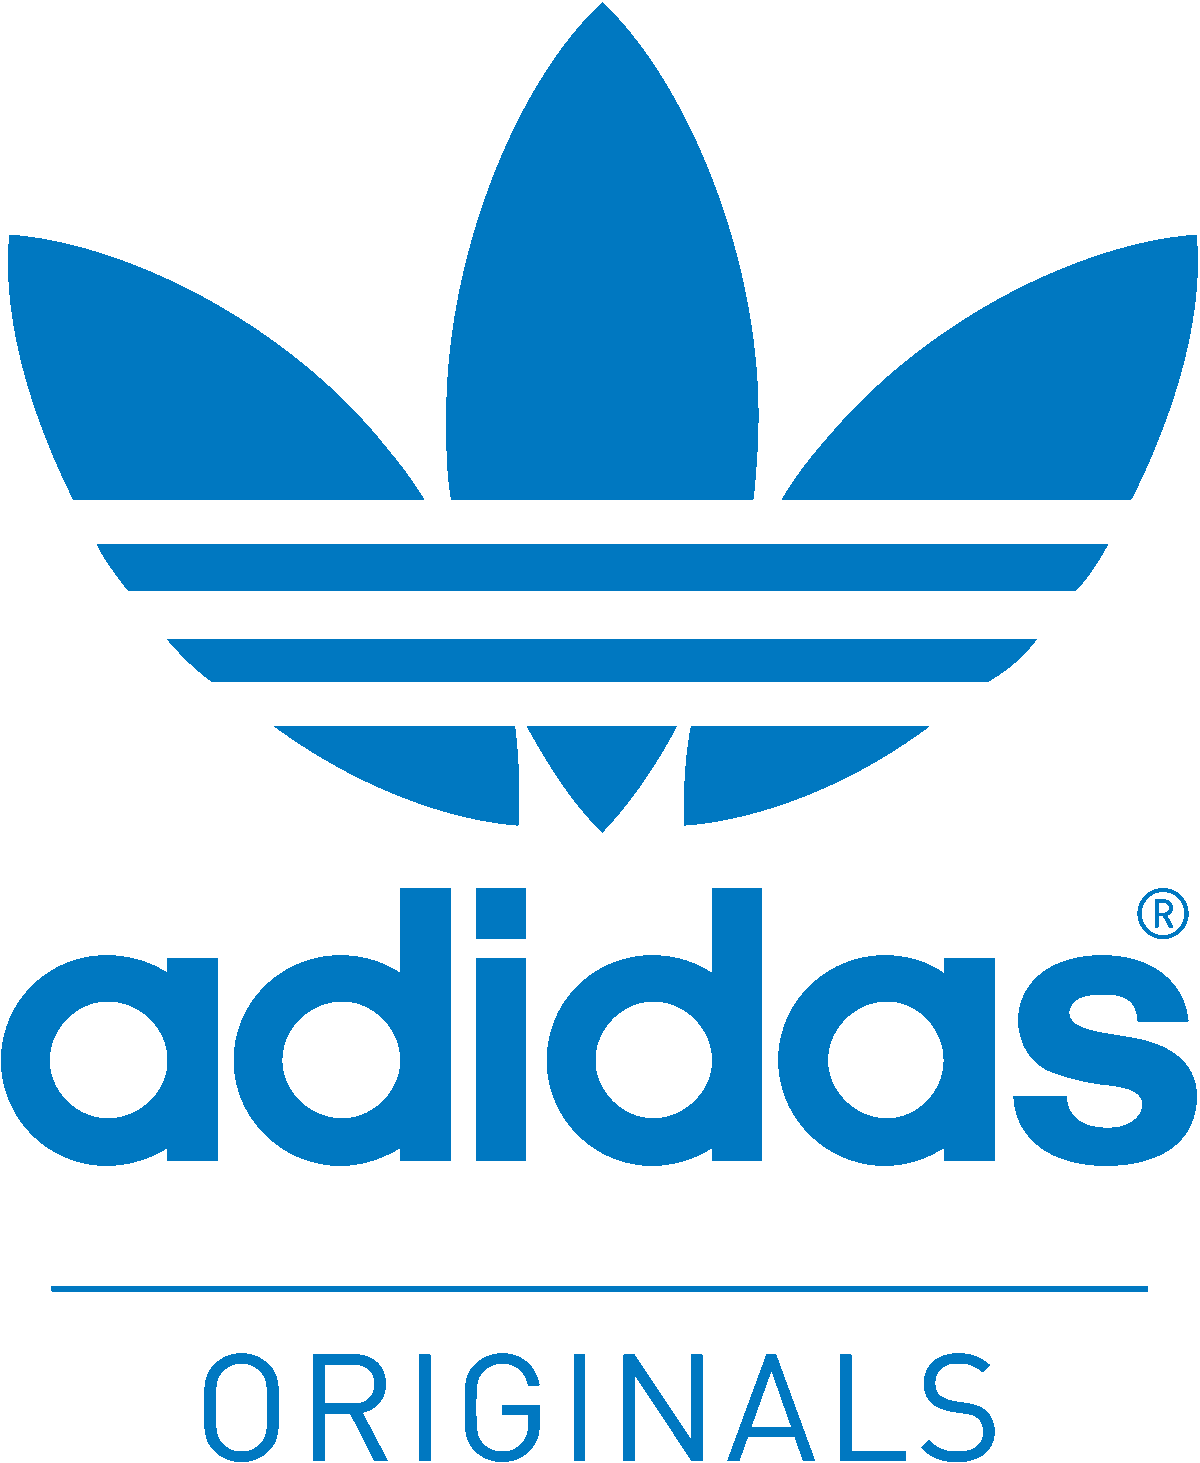 The logo creates a leaf using 3 ovals and it contains the 3 stripes 